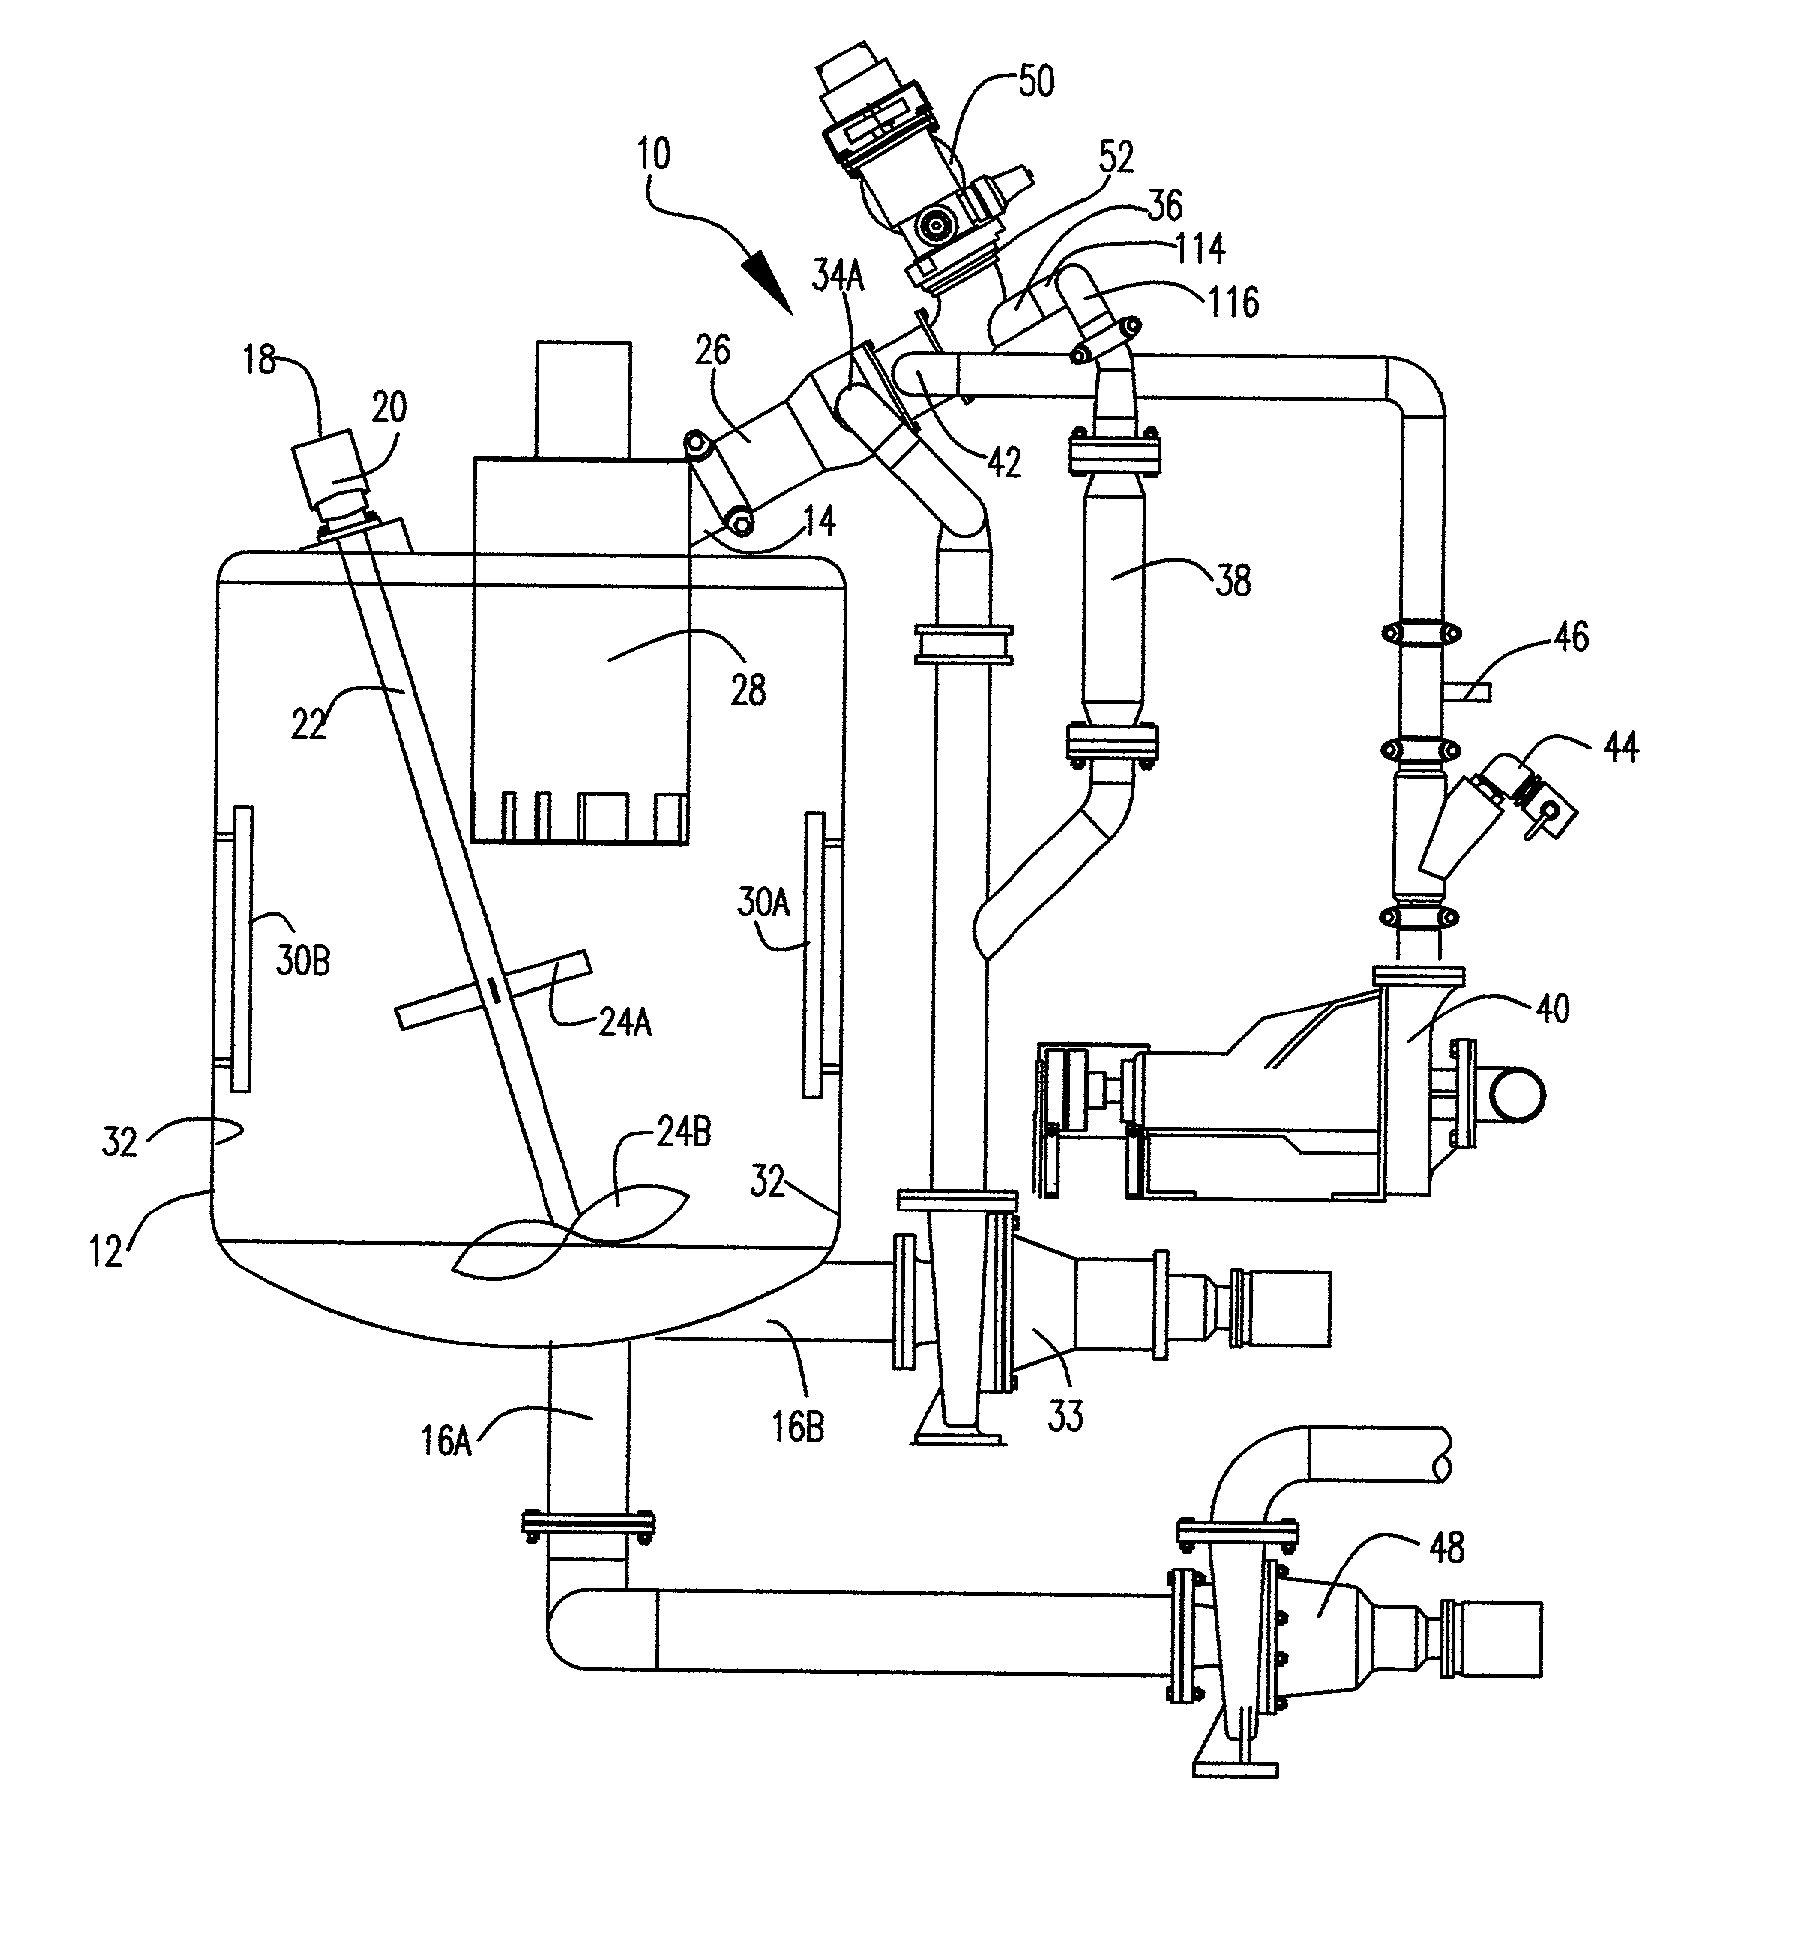 Cement mixing system for oil well cementing